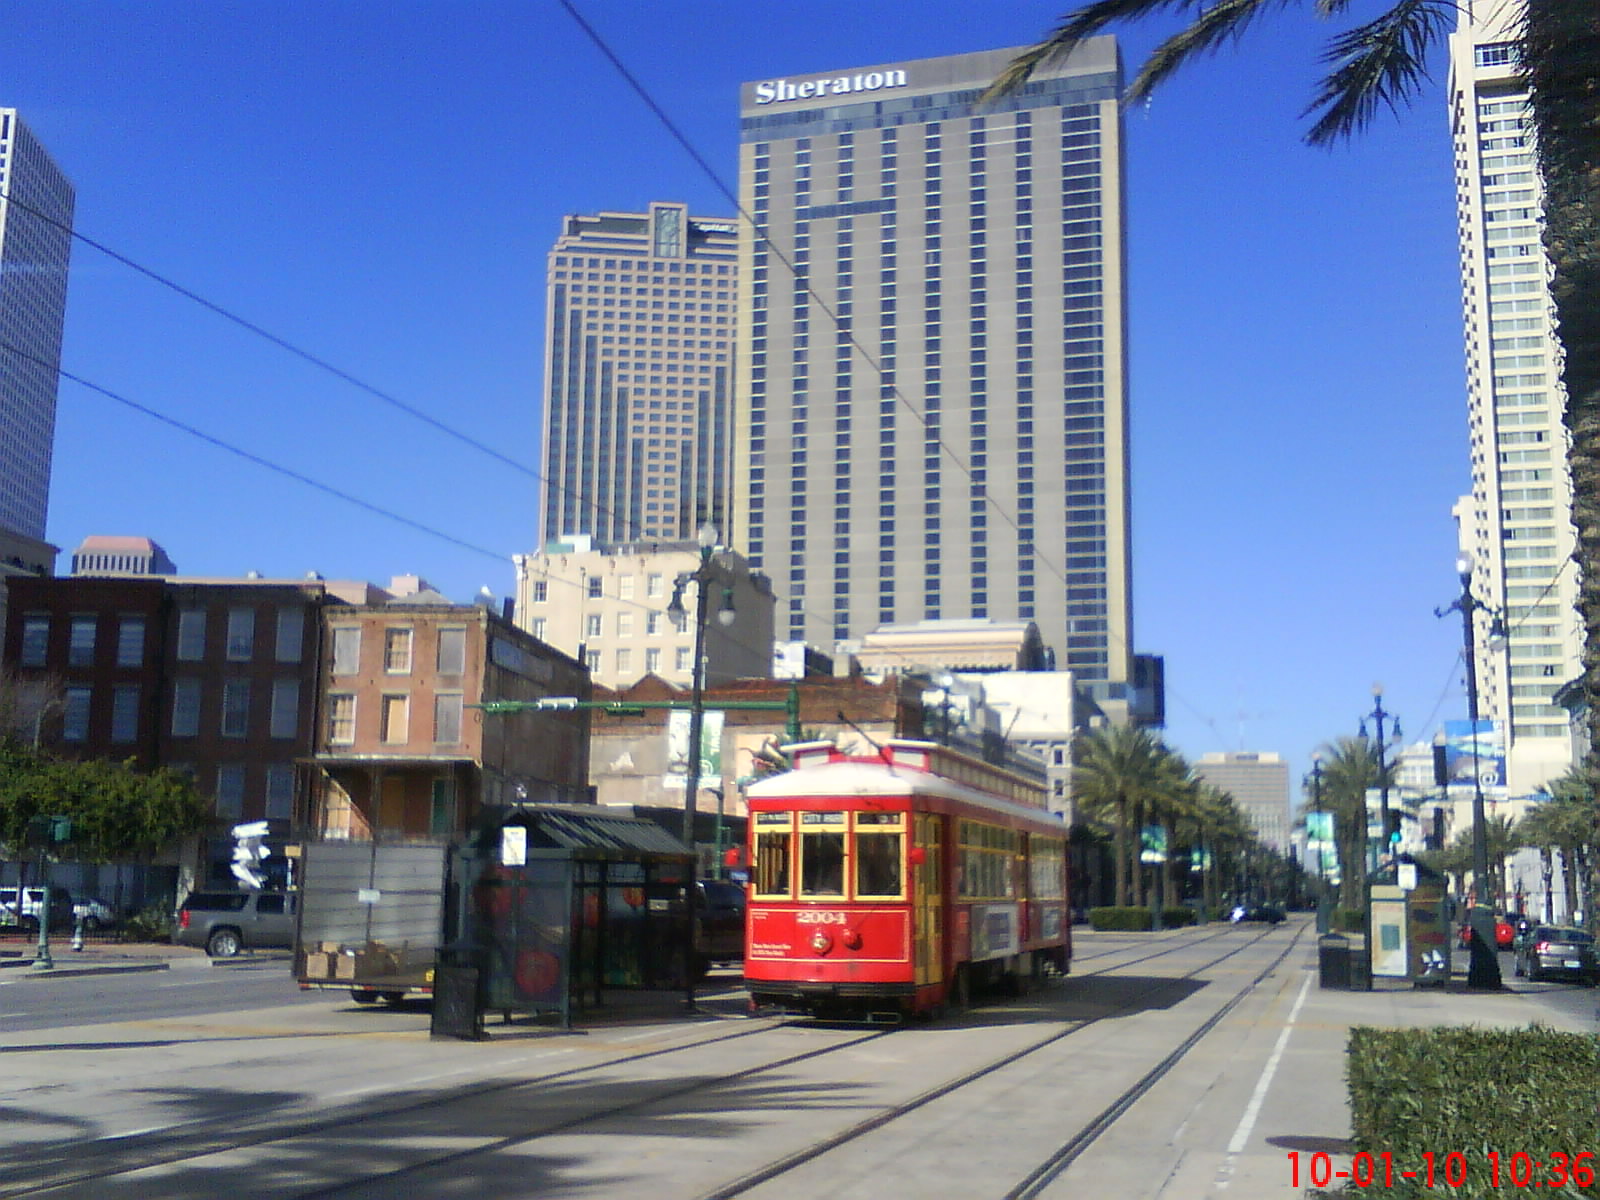 new orleans casino and hotel